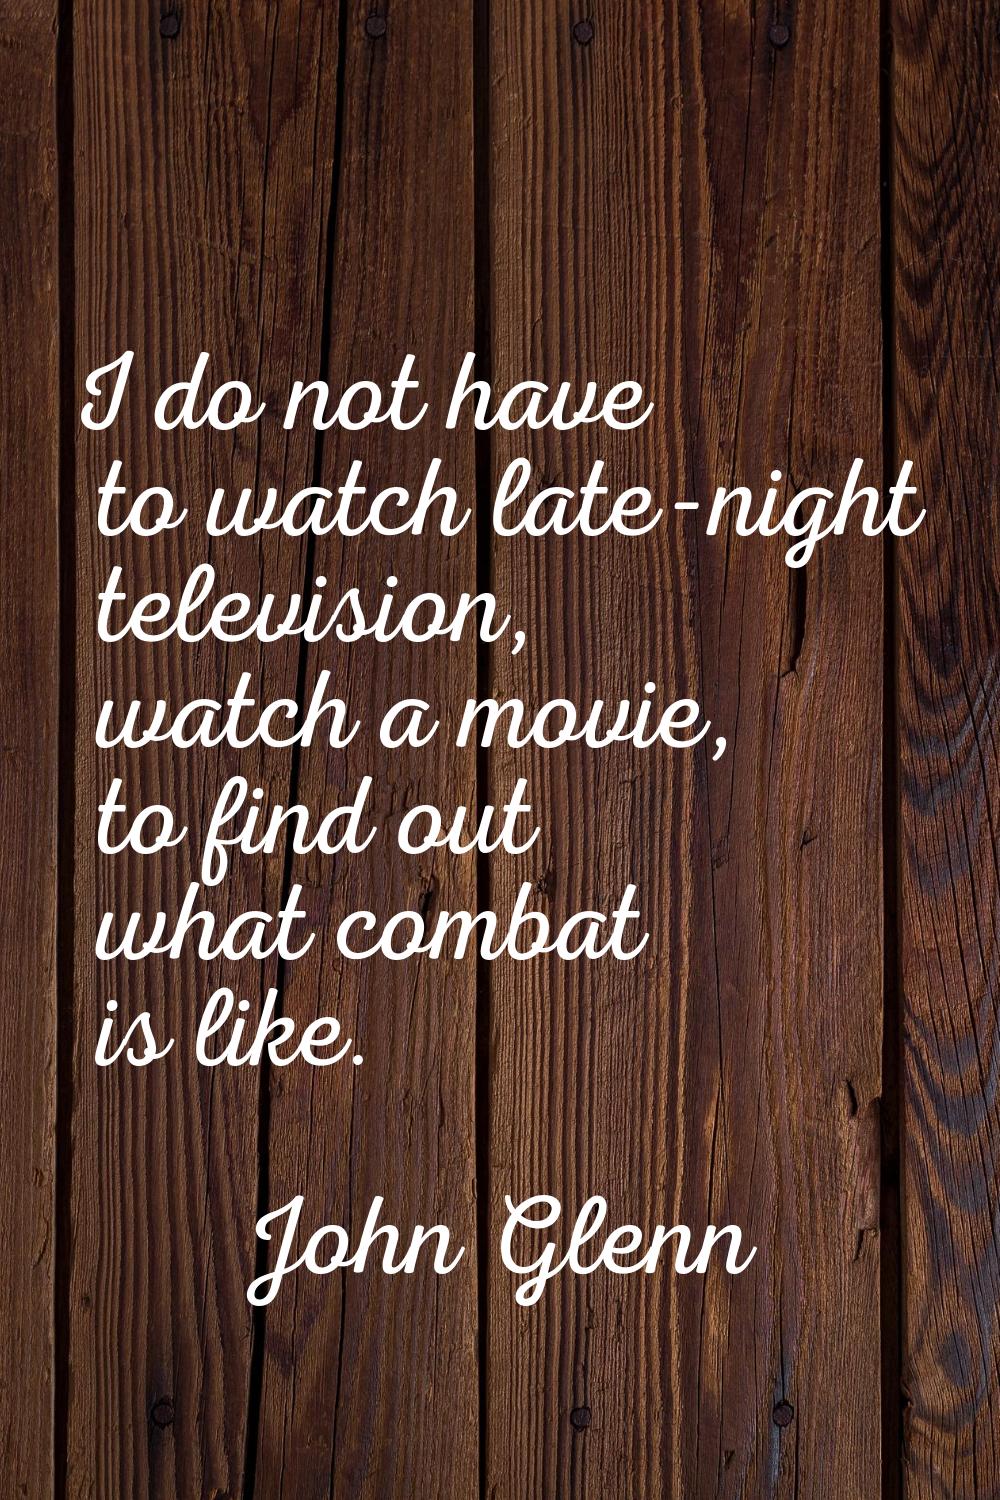 I do not have to watch late-night television, watch a movie, to find out what combat is like.